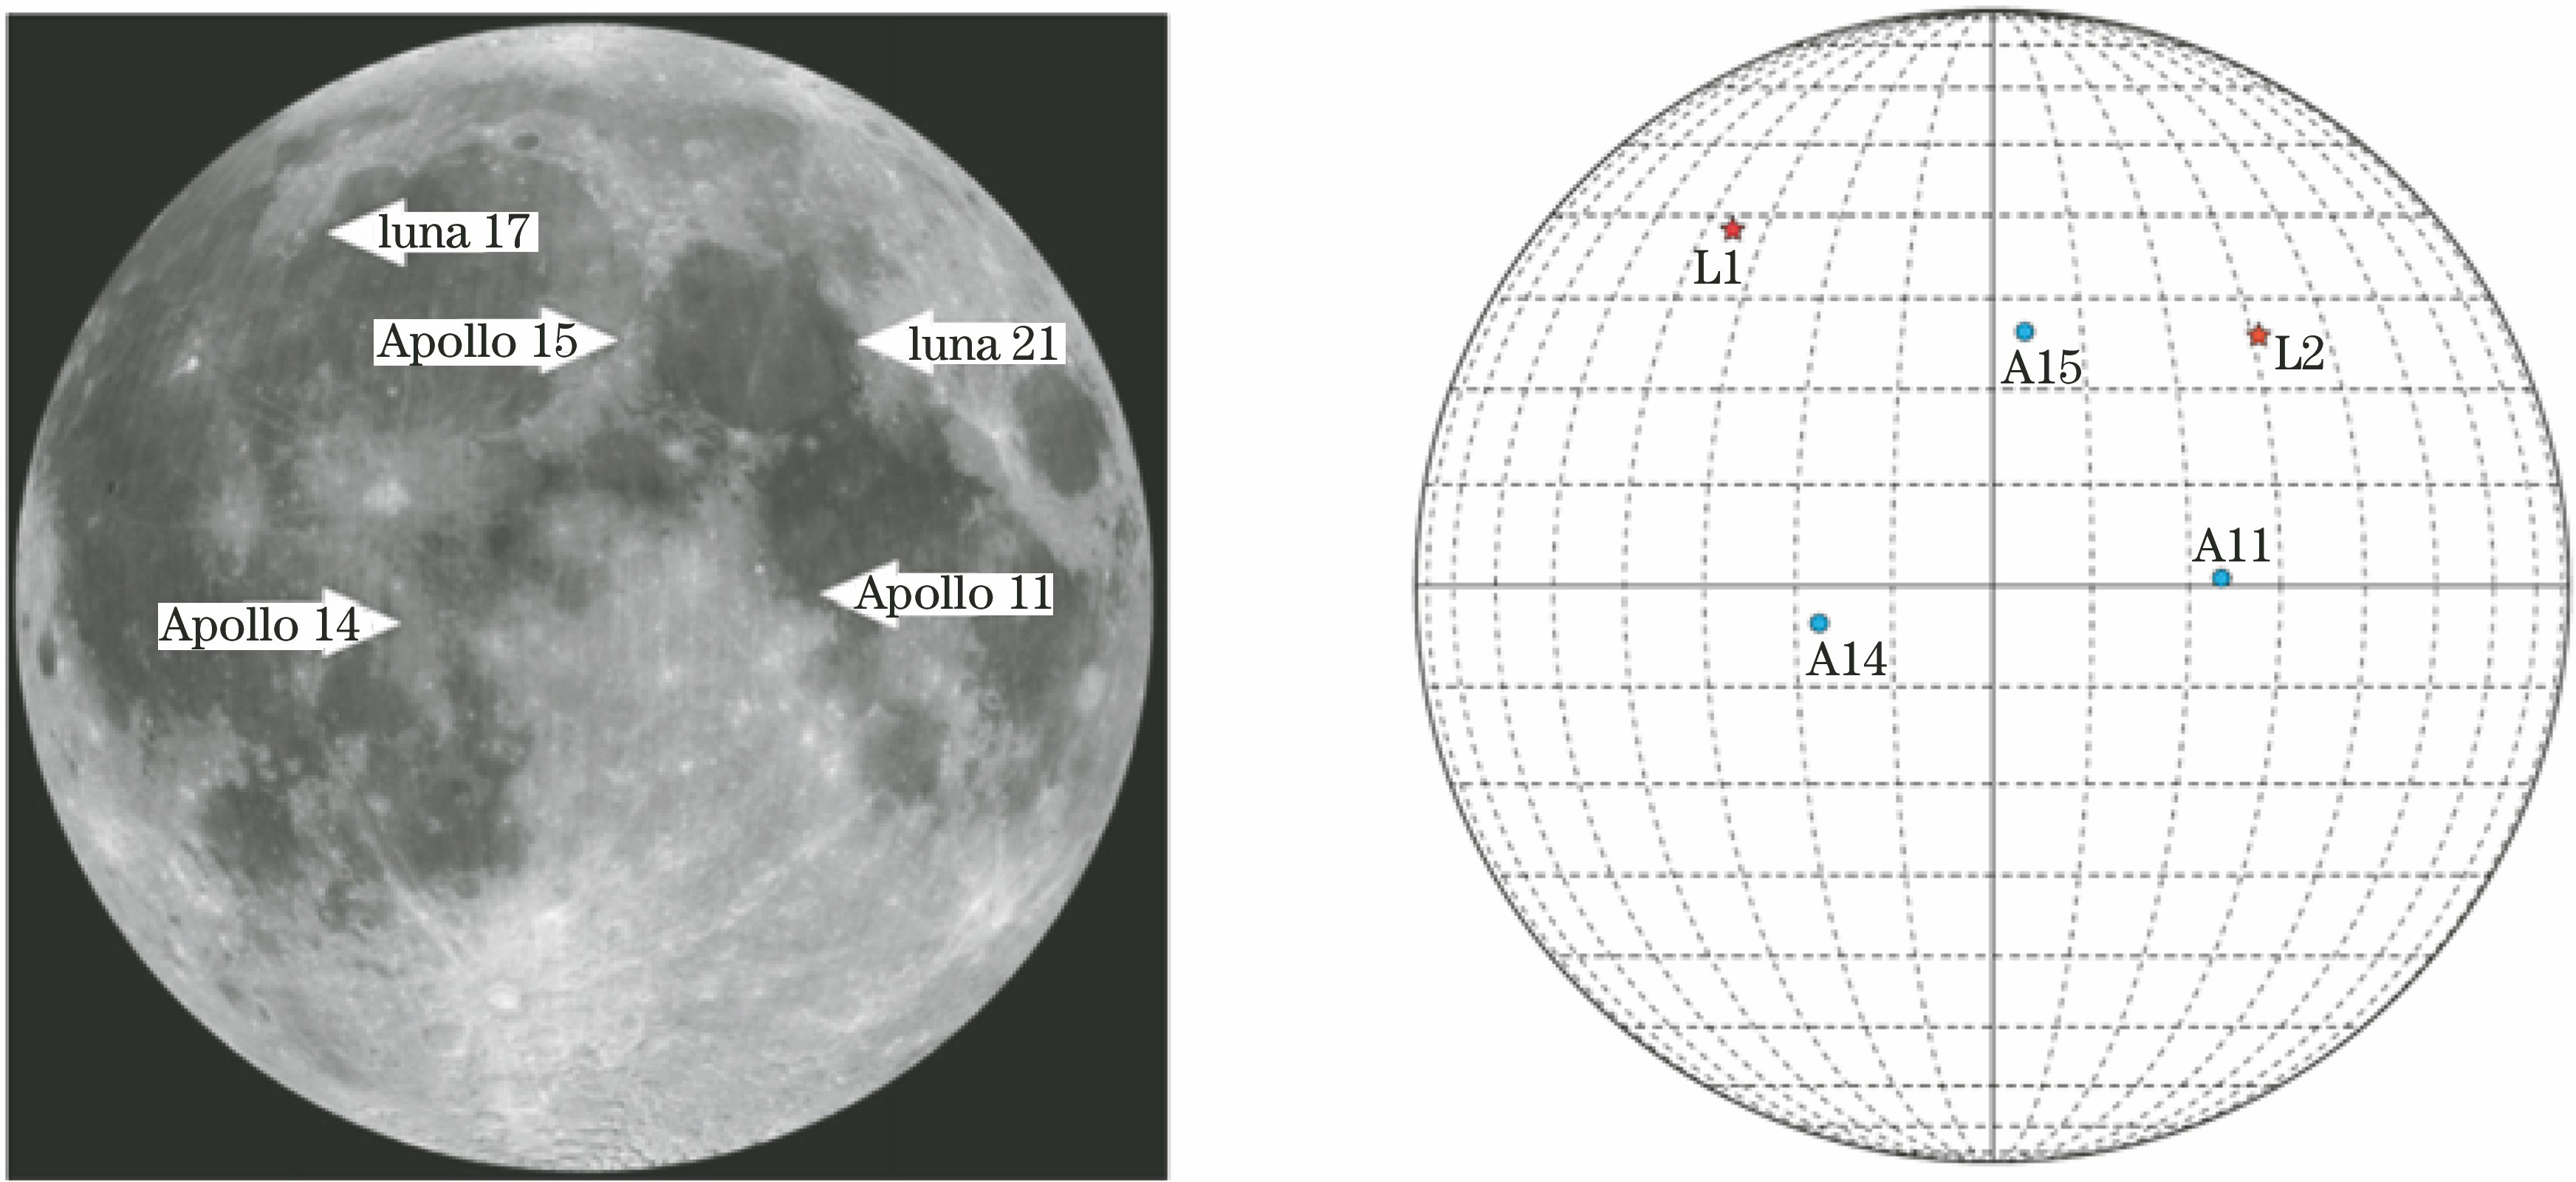 Positions of three Apollo retro-reflectors (A11, A14, and A15) and two Lunakhod retro-reflectors (L1 and L2) on surface of the Moon